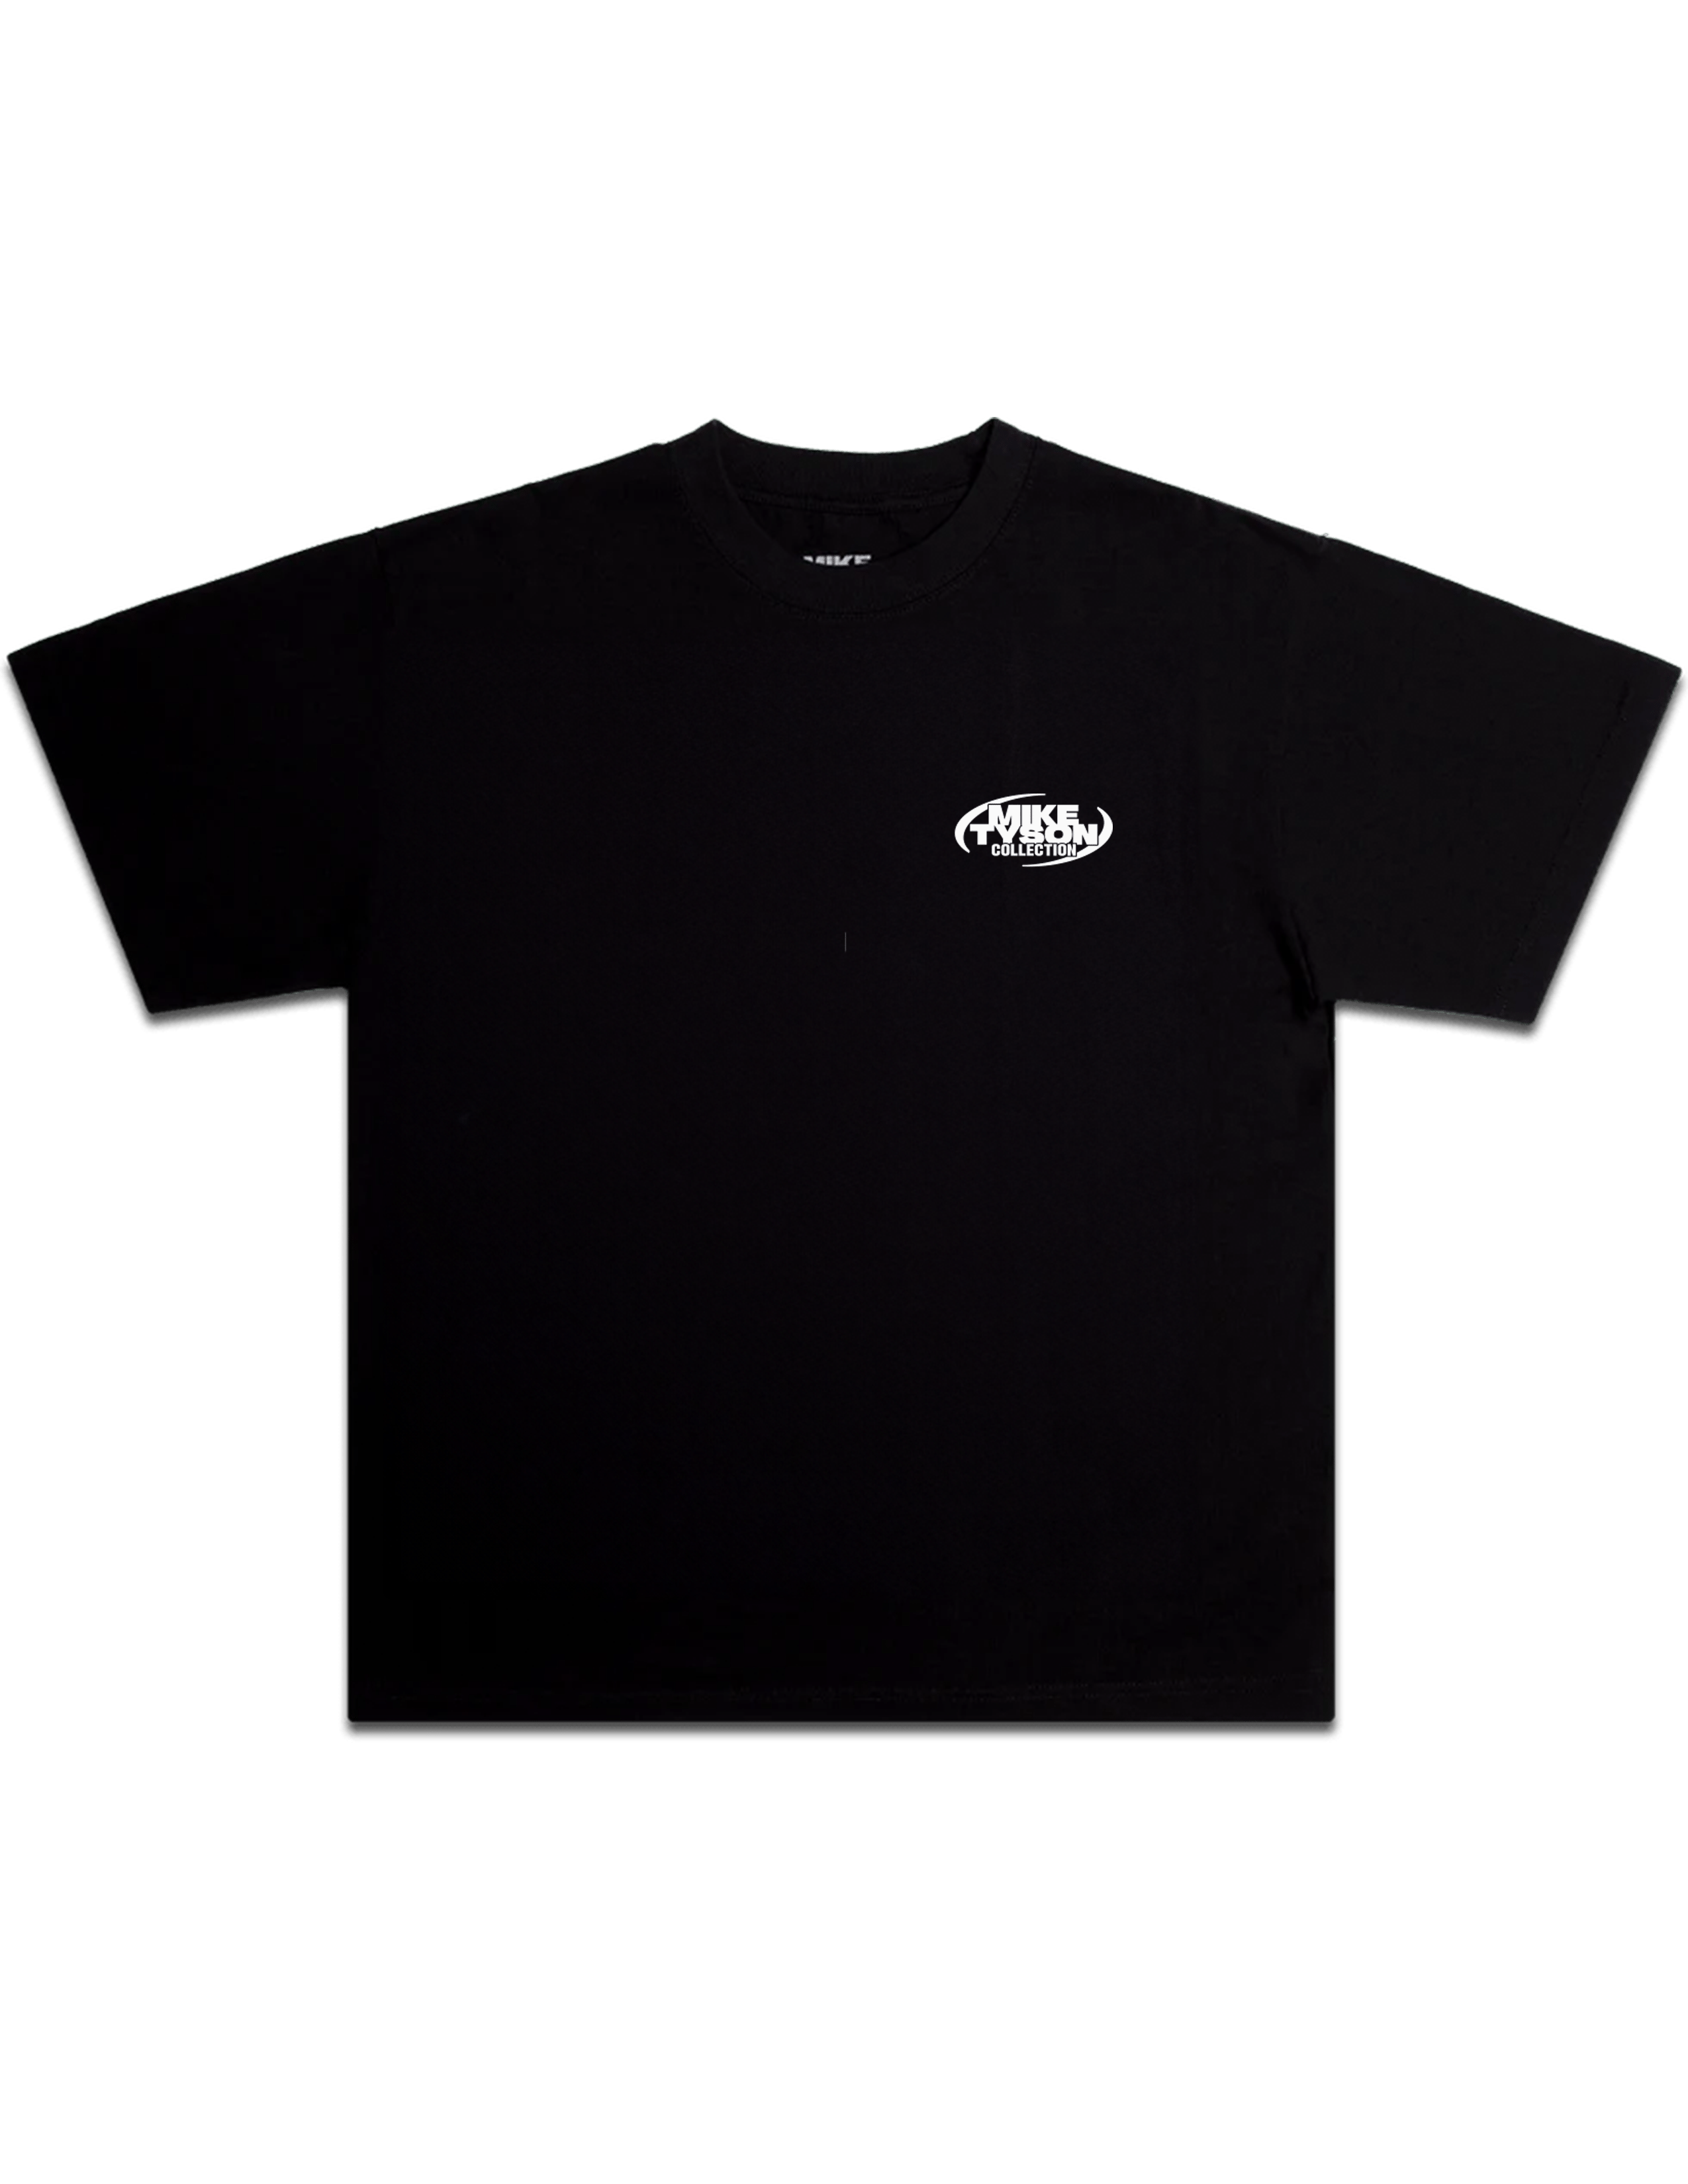 I'm The Best Ever Type Tee - MT Collection